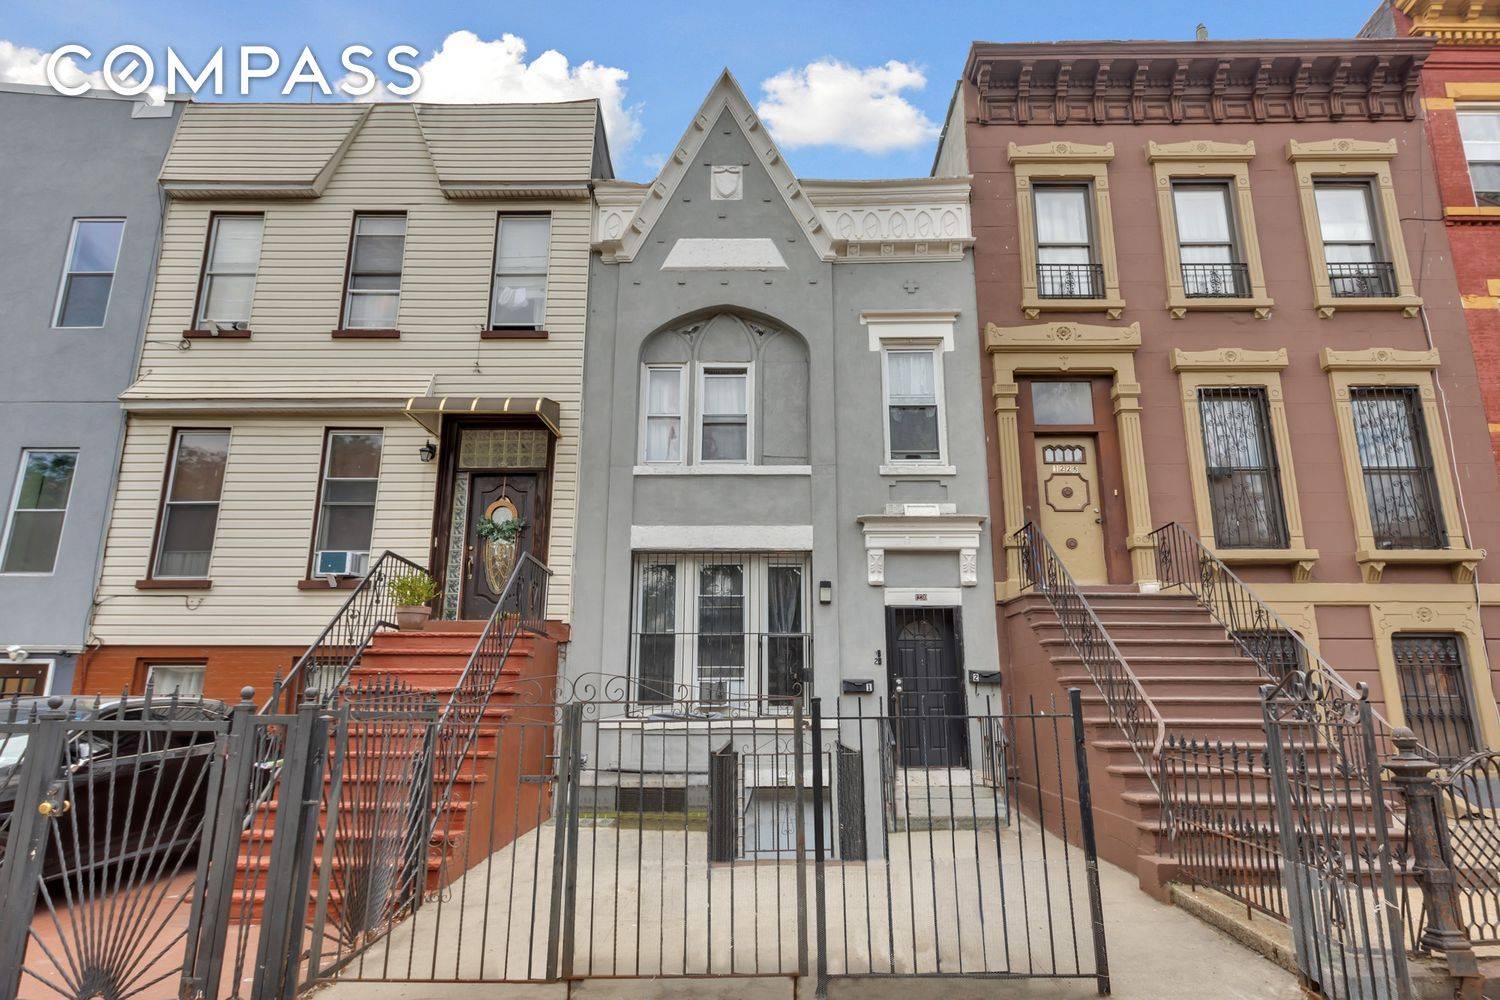 Opportunity awaits in this charming Brooklyn two family featuring two three bedroom, one bathroom units in move in ready condition, plus outdoor space and a full basement.